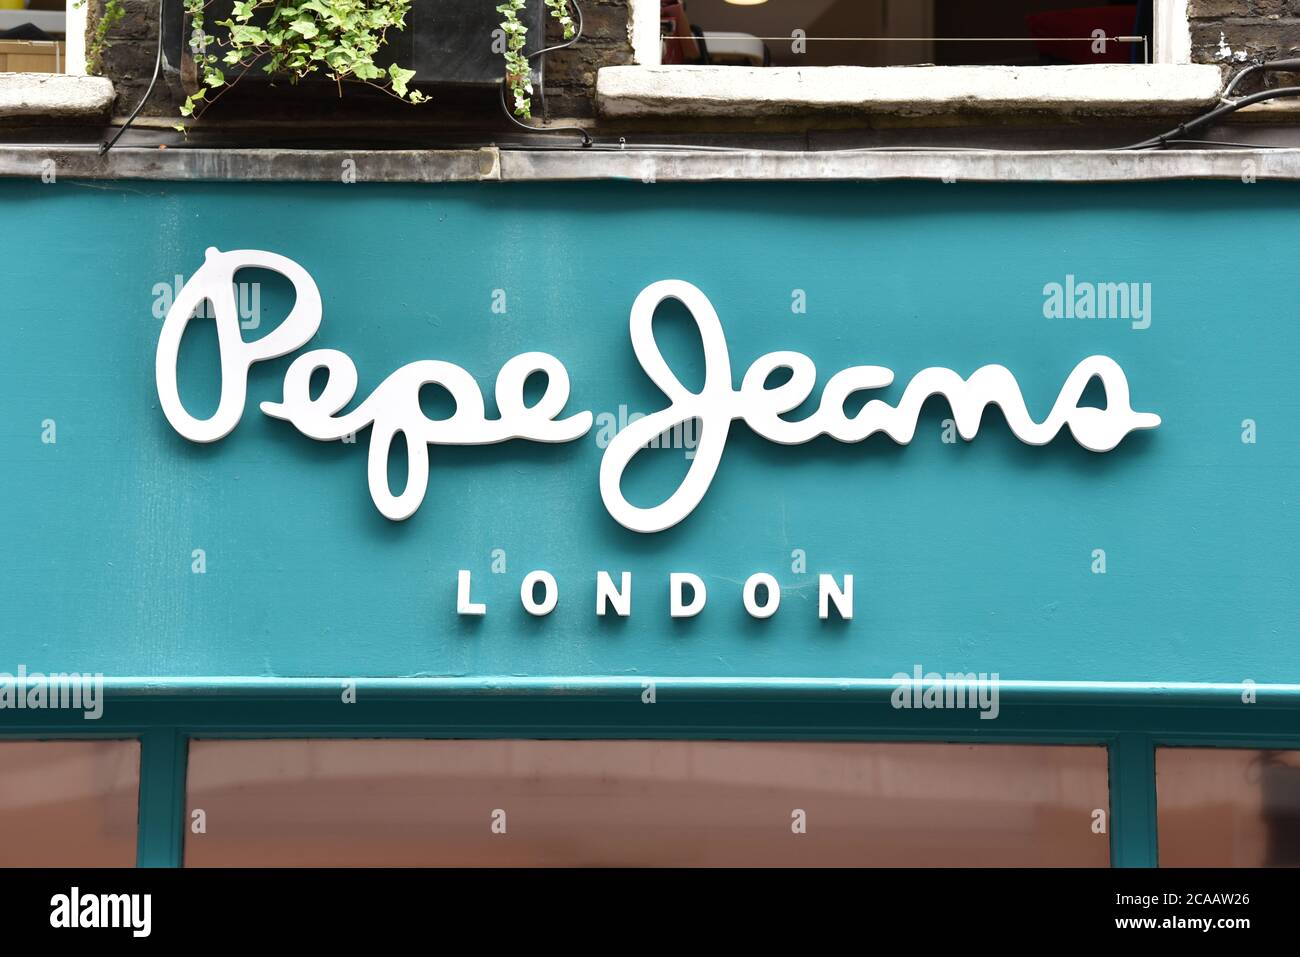 Pepe Jeans High Resolution Stock Photography and Images - Alamy